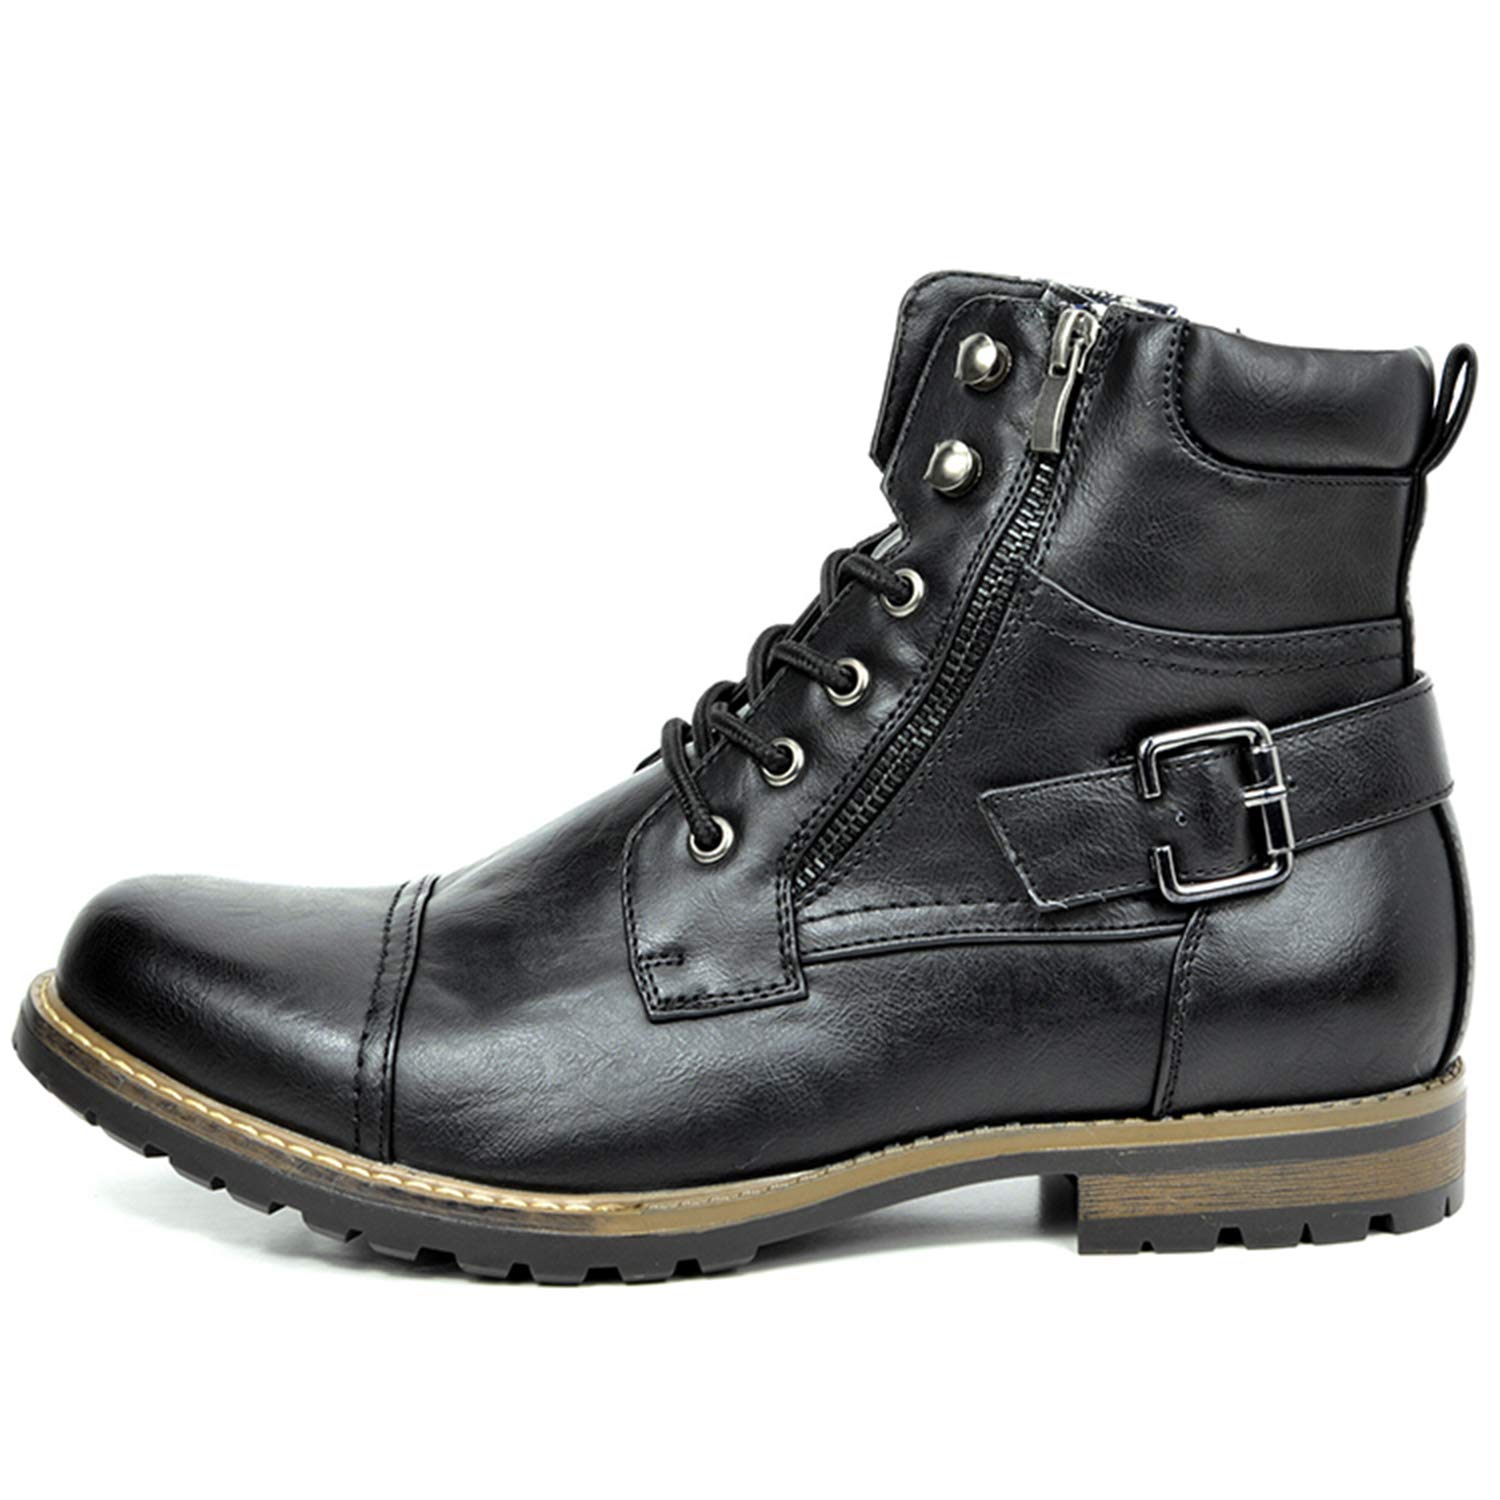 Bruno Marc Men's Military Motorcycle Combat Boots, Black-philly-3, Size ...